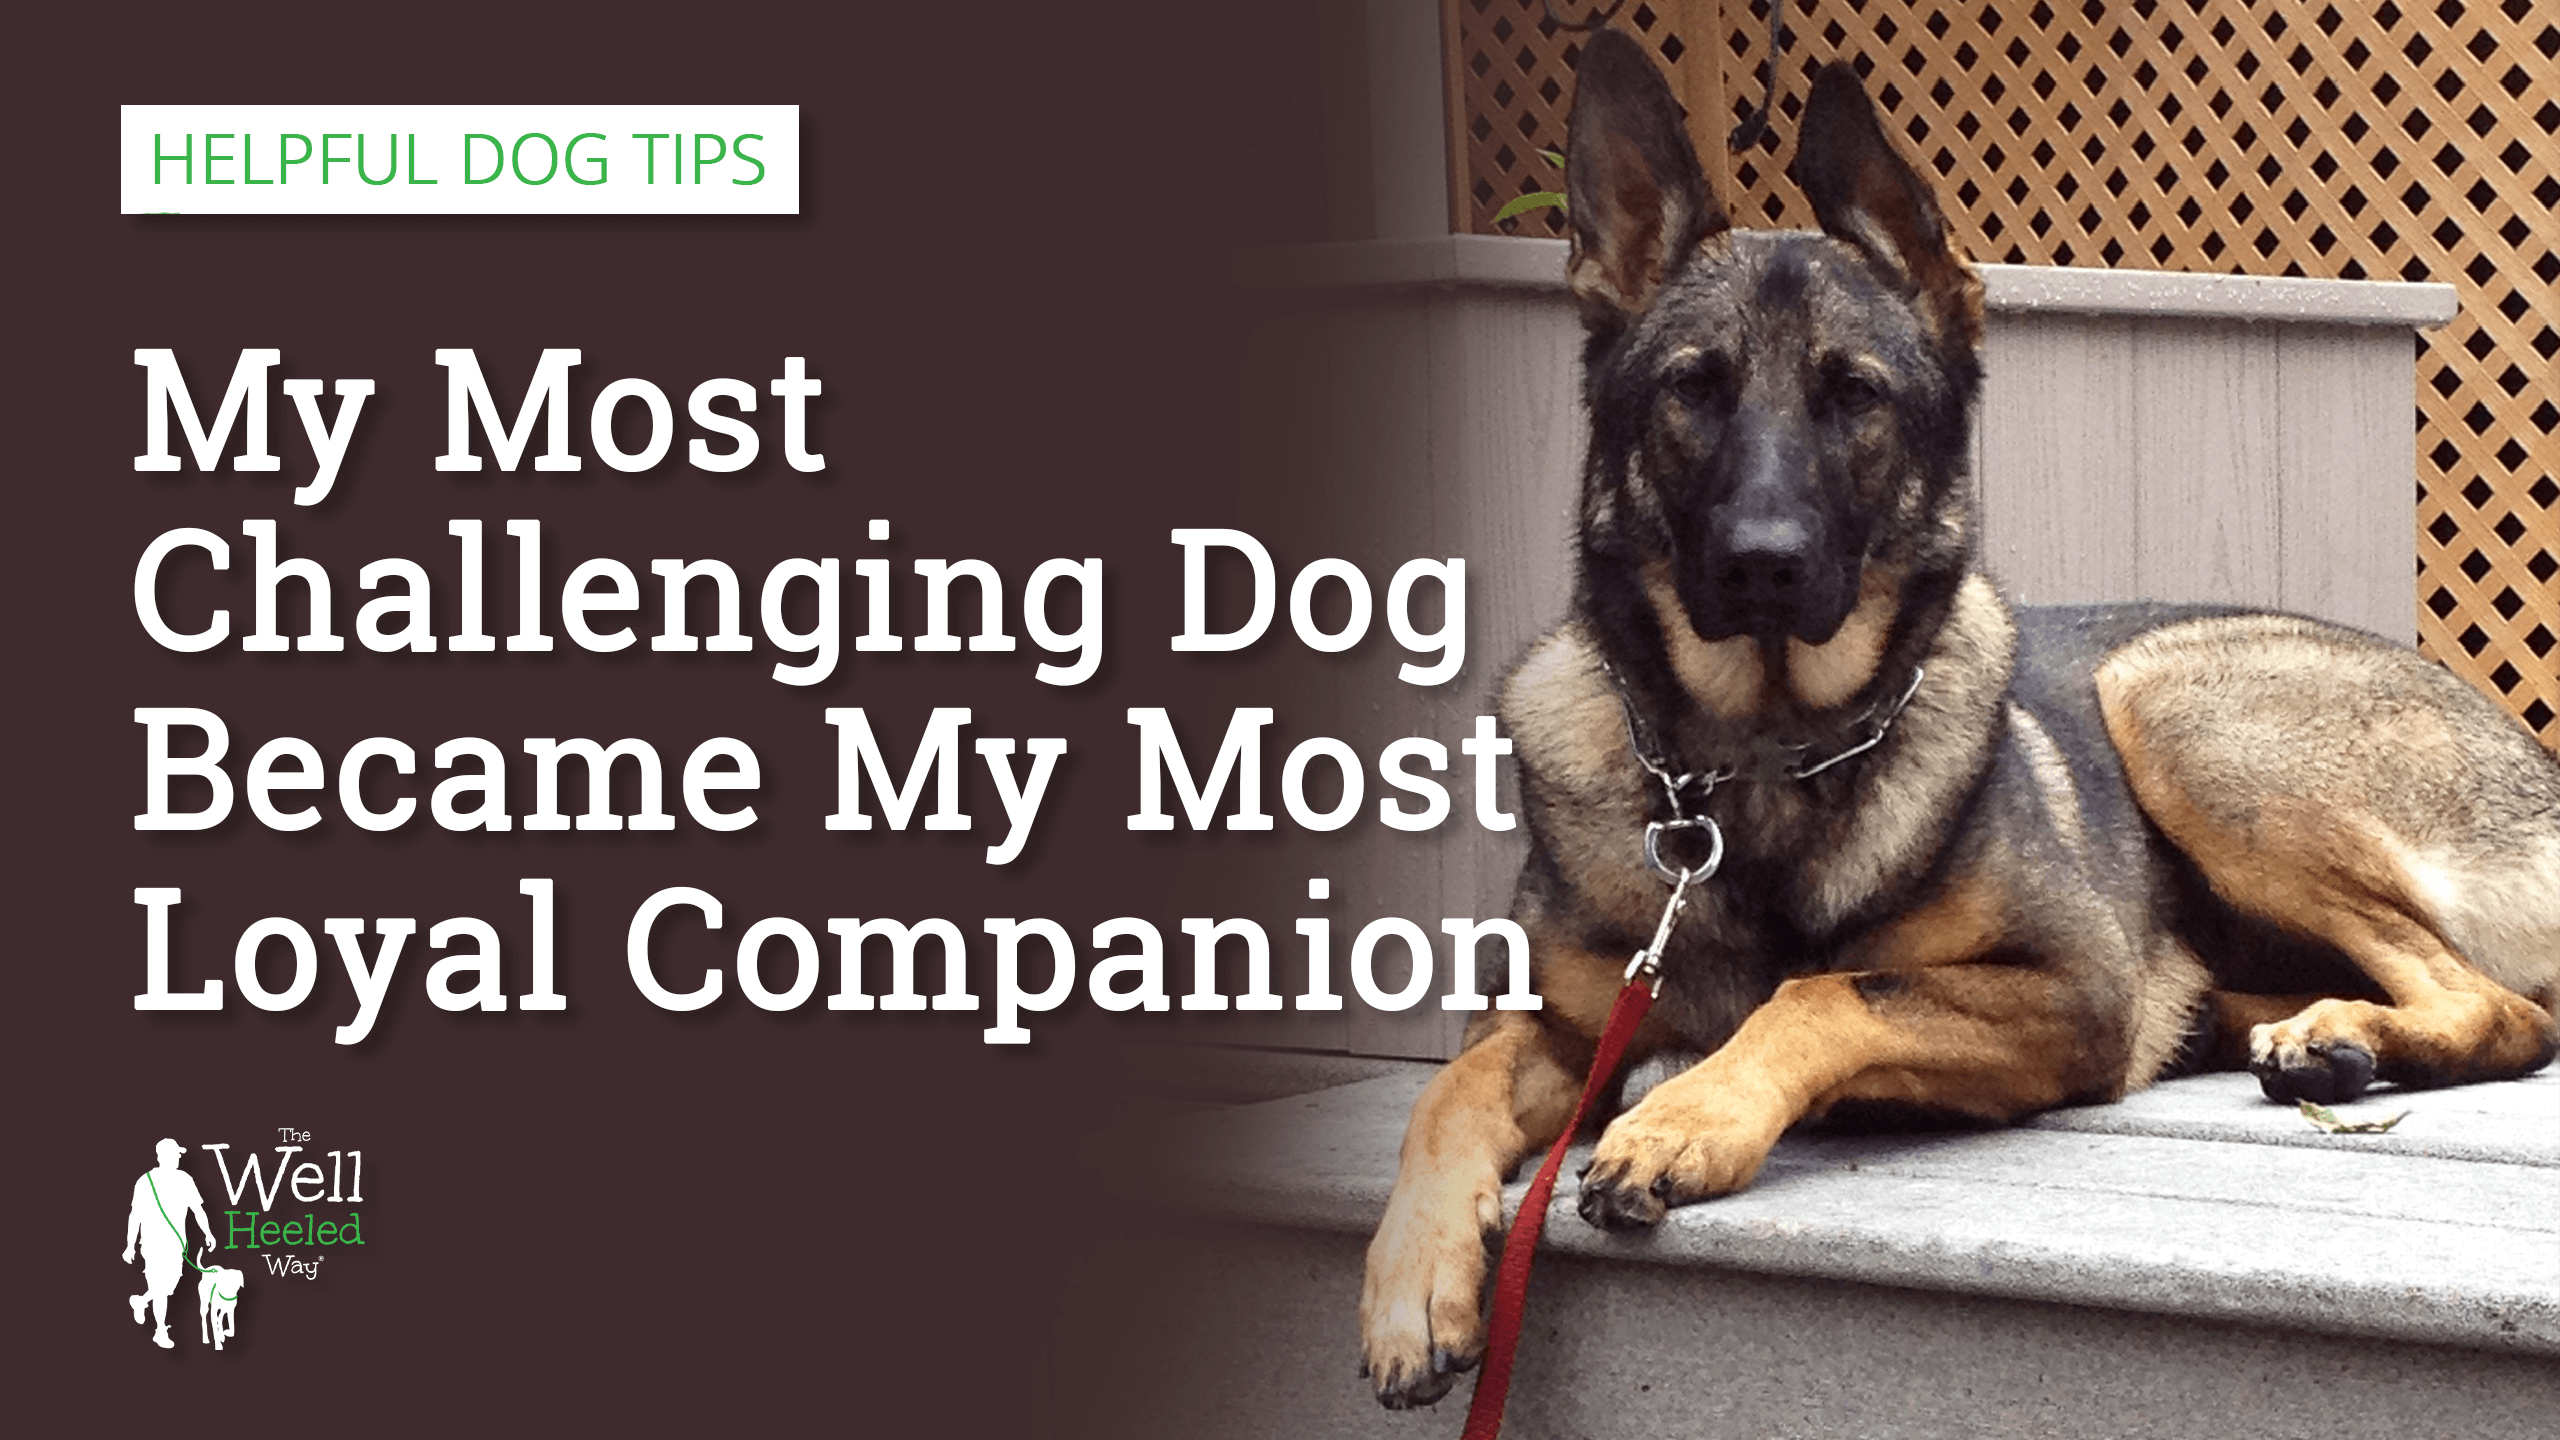 My Most Challenging Dog Became My Most Loyal Companion